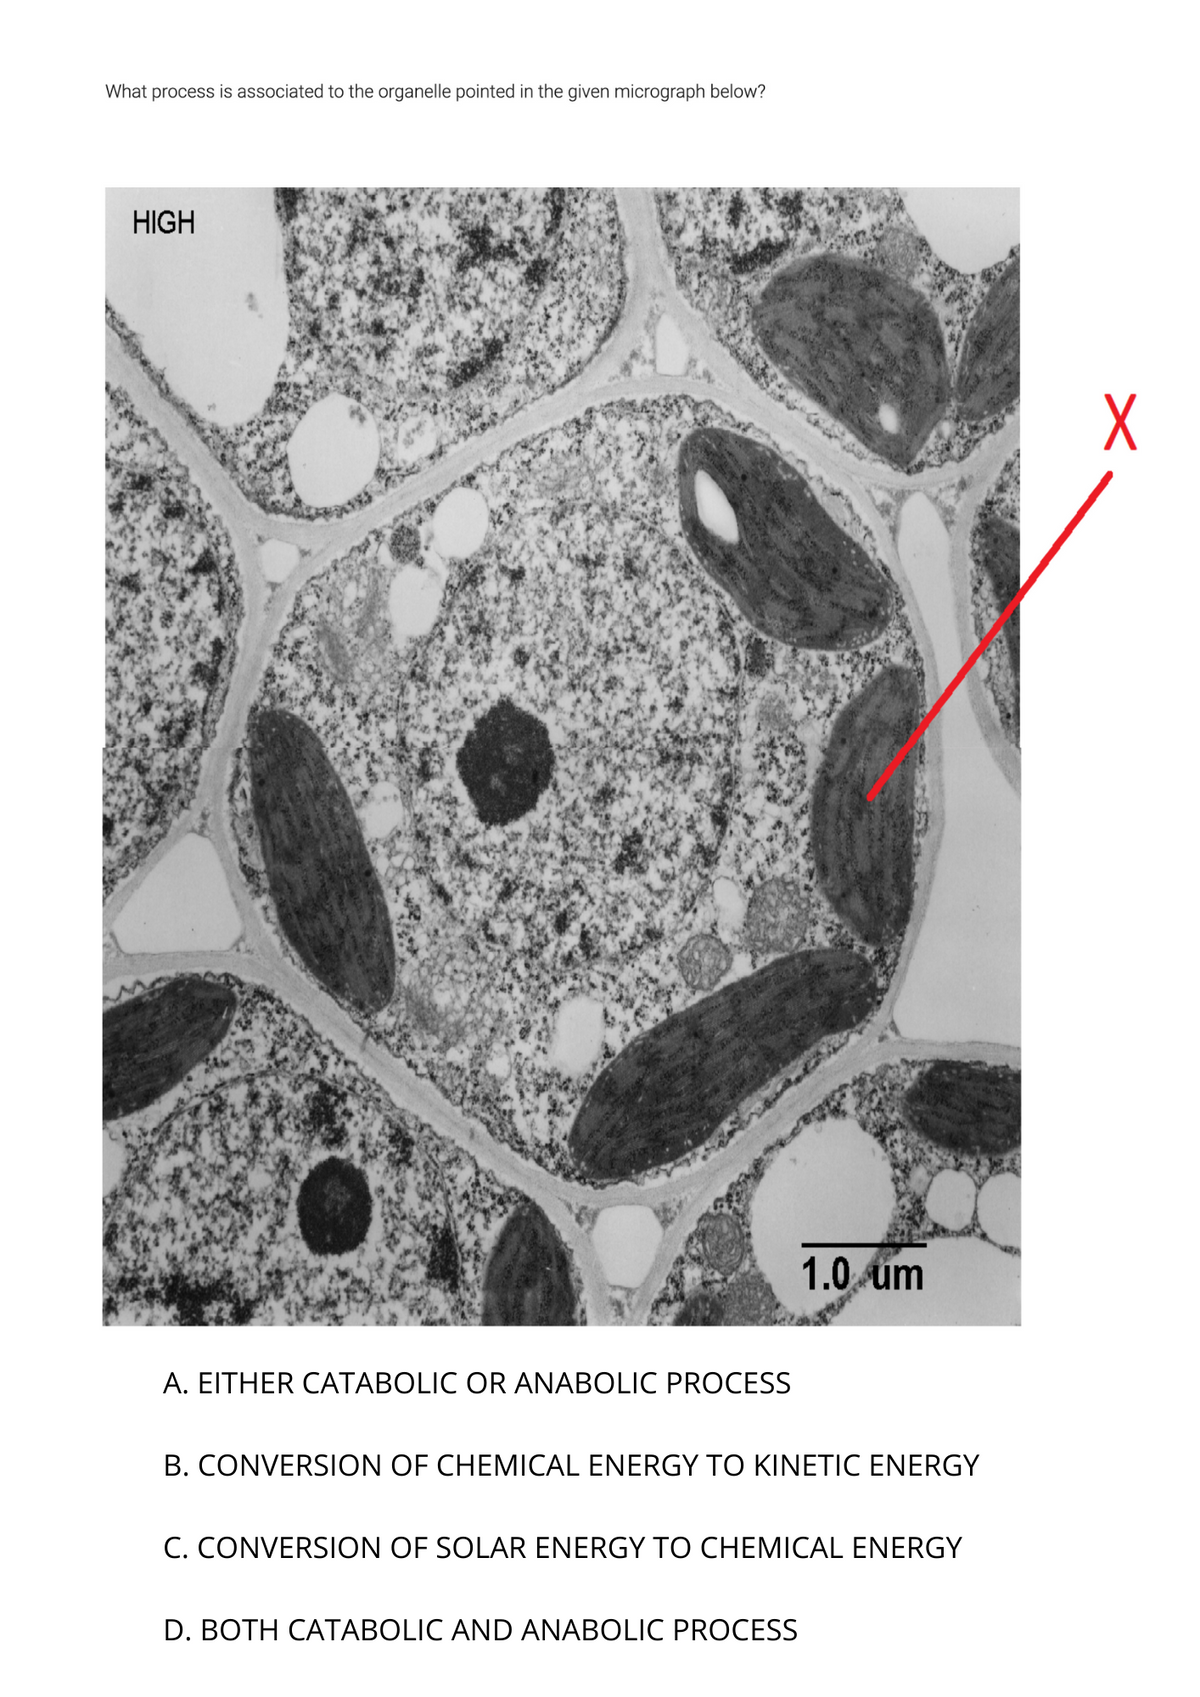 What process is associated to the organelle pointed in the given micrograph below?
HIGH
1.0 üm
A. EITHER CATABOLIC OR ANABOLIC PROCESS
B. CONVERSION OF CHEMICAL ENERGY TO KINETIC ENERGY
C. CONVERSION OF SOLAR ENERGY TO CHEMICAL ENERGY
D. BOTH CATABOLIC AND ANABOLIC PROCESS
